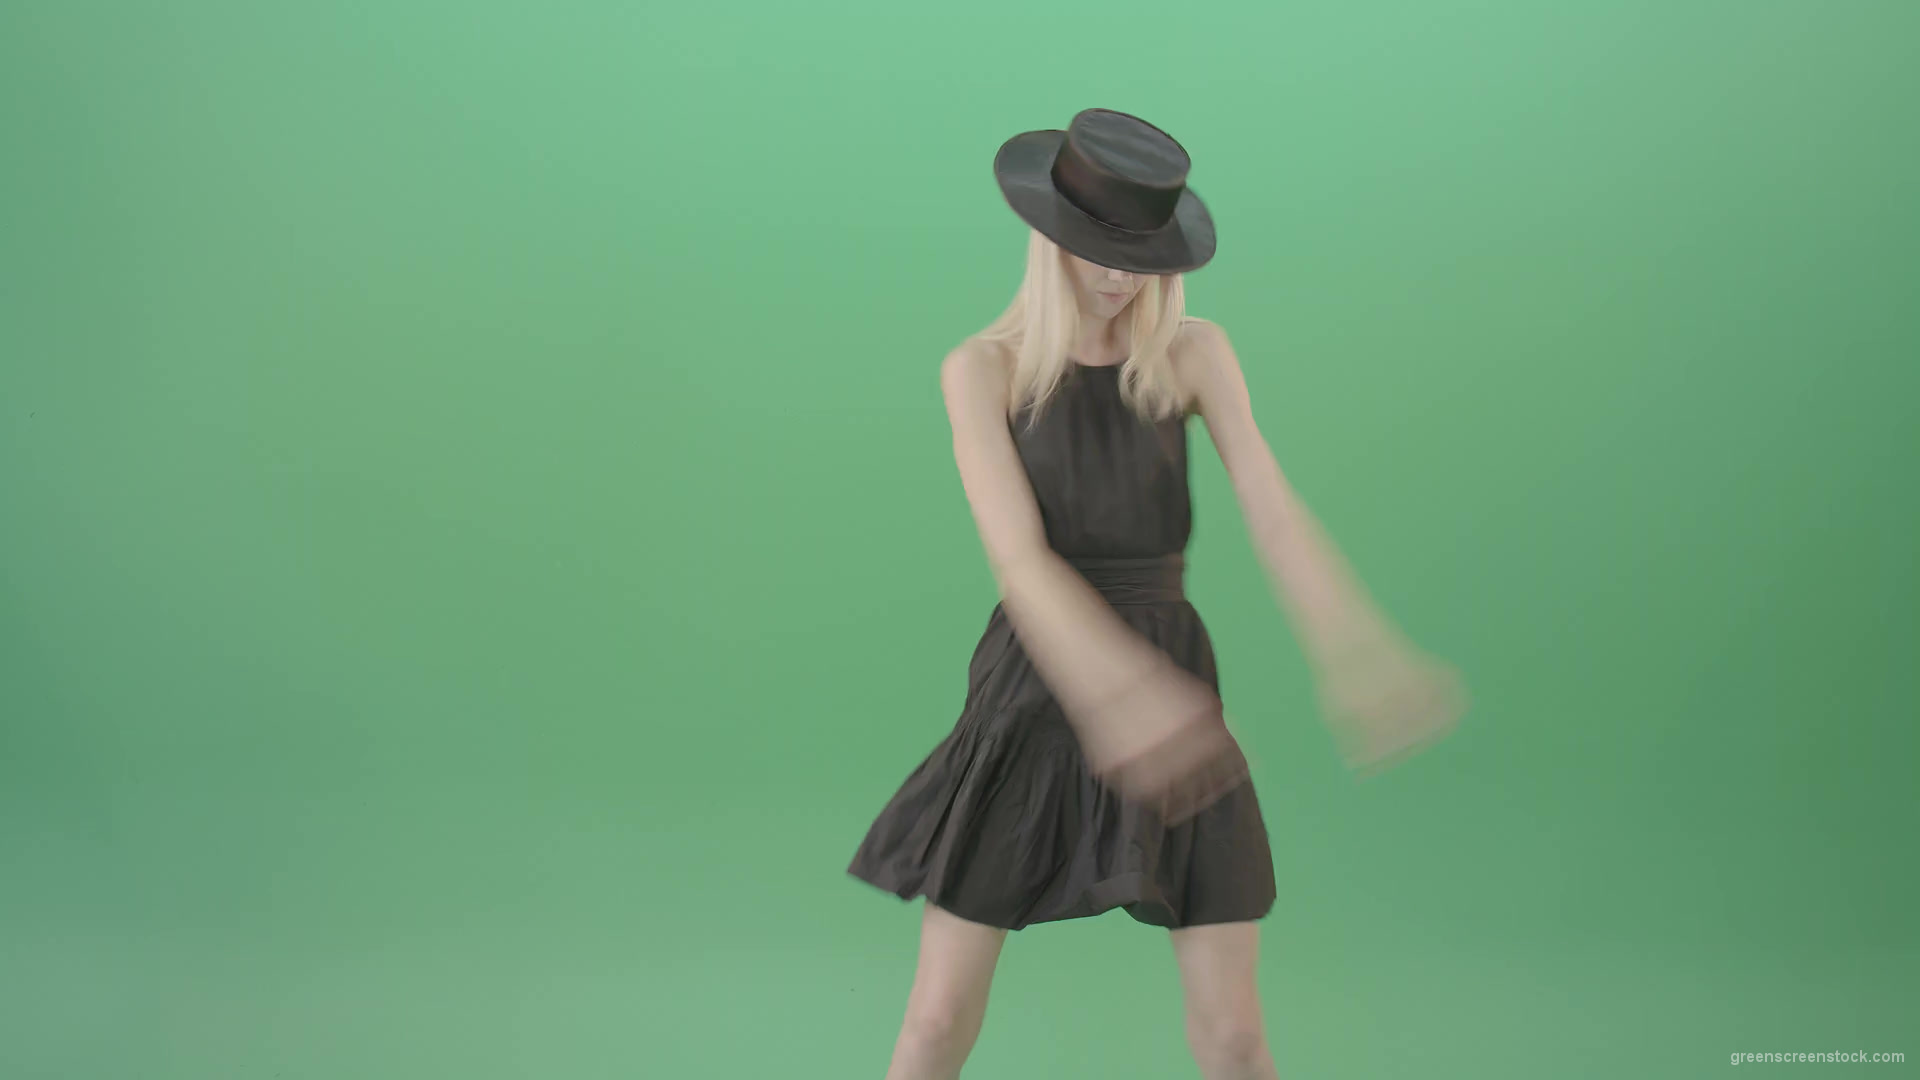 Fashion-model-in-black-dress-posing-dance-isolated-on-green-background-4K-Video-Footage-1920_004 Green Screen Stock